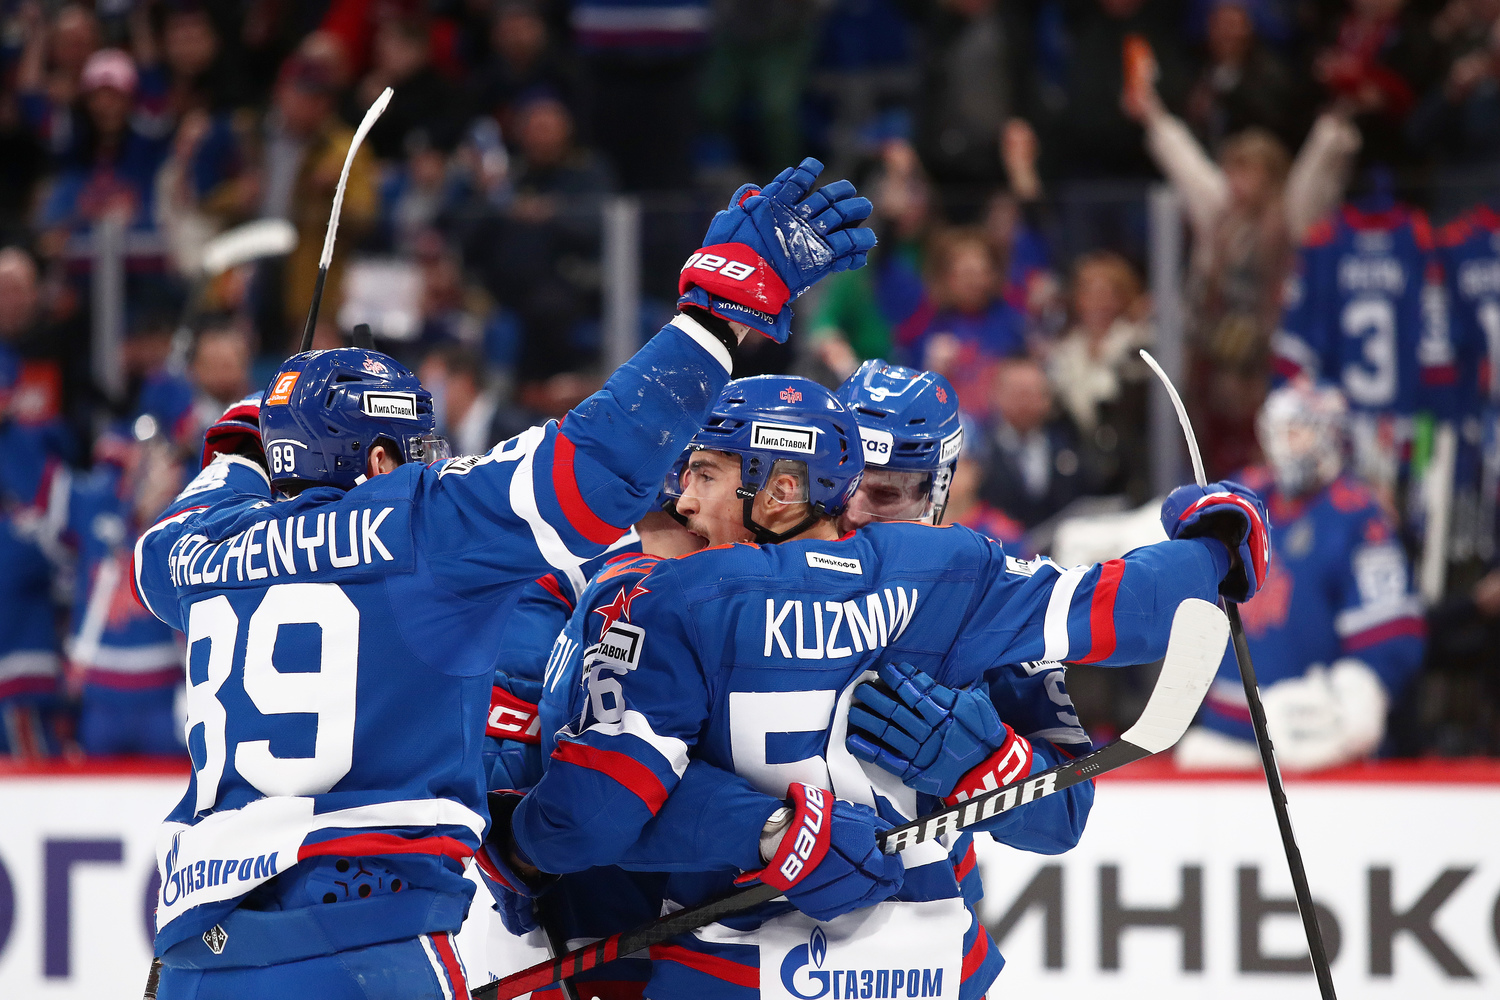 SKA scored three unanswered goals against Torpedo and reached the quarterfinals of the Gagarin Cup